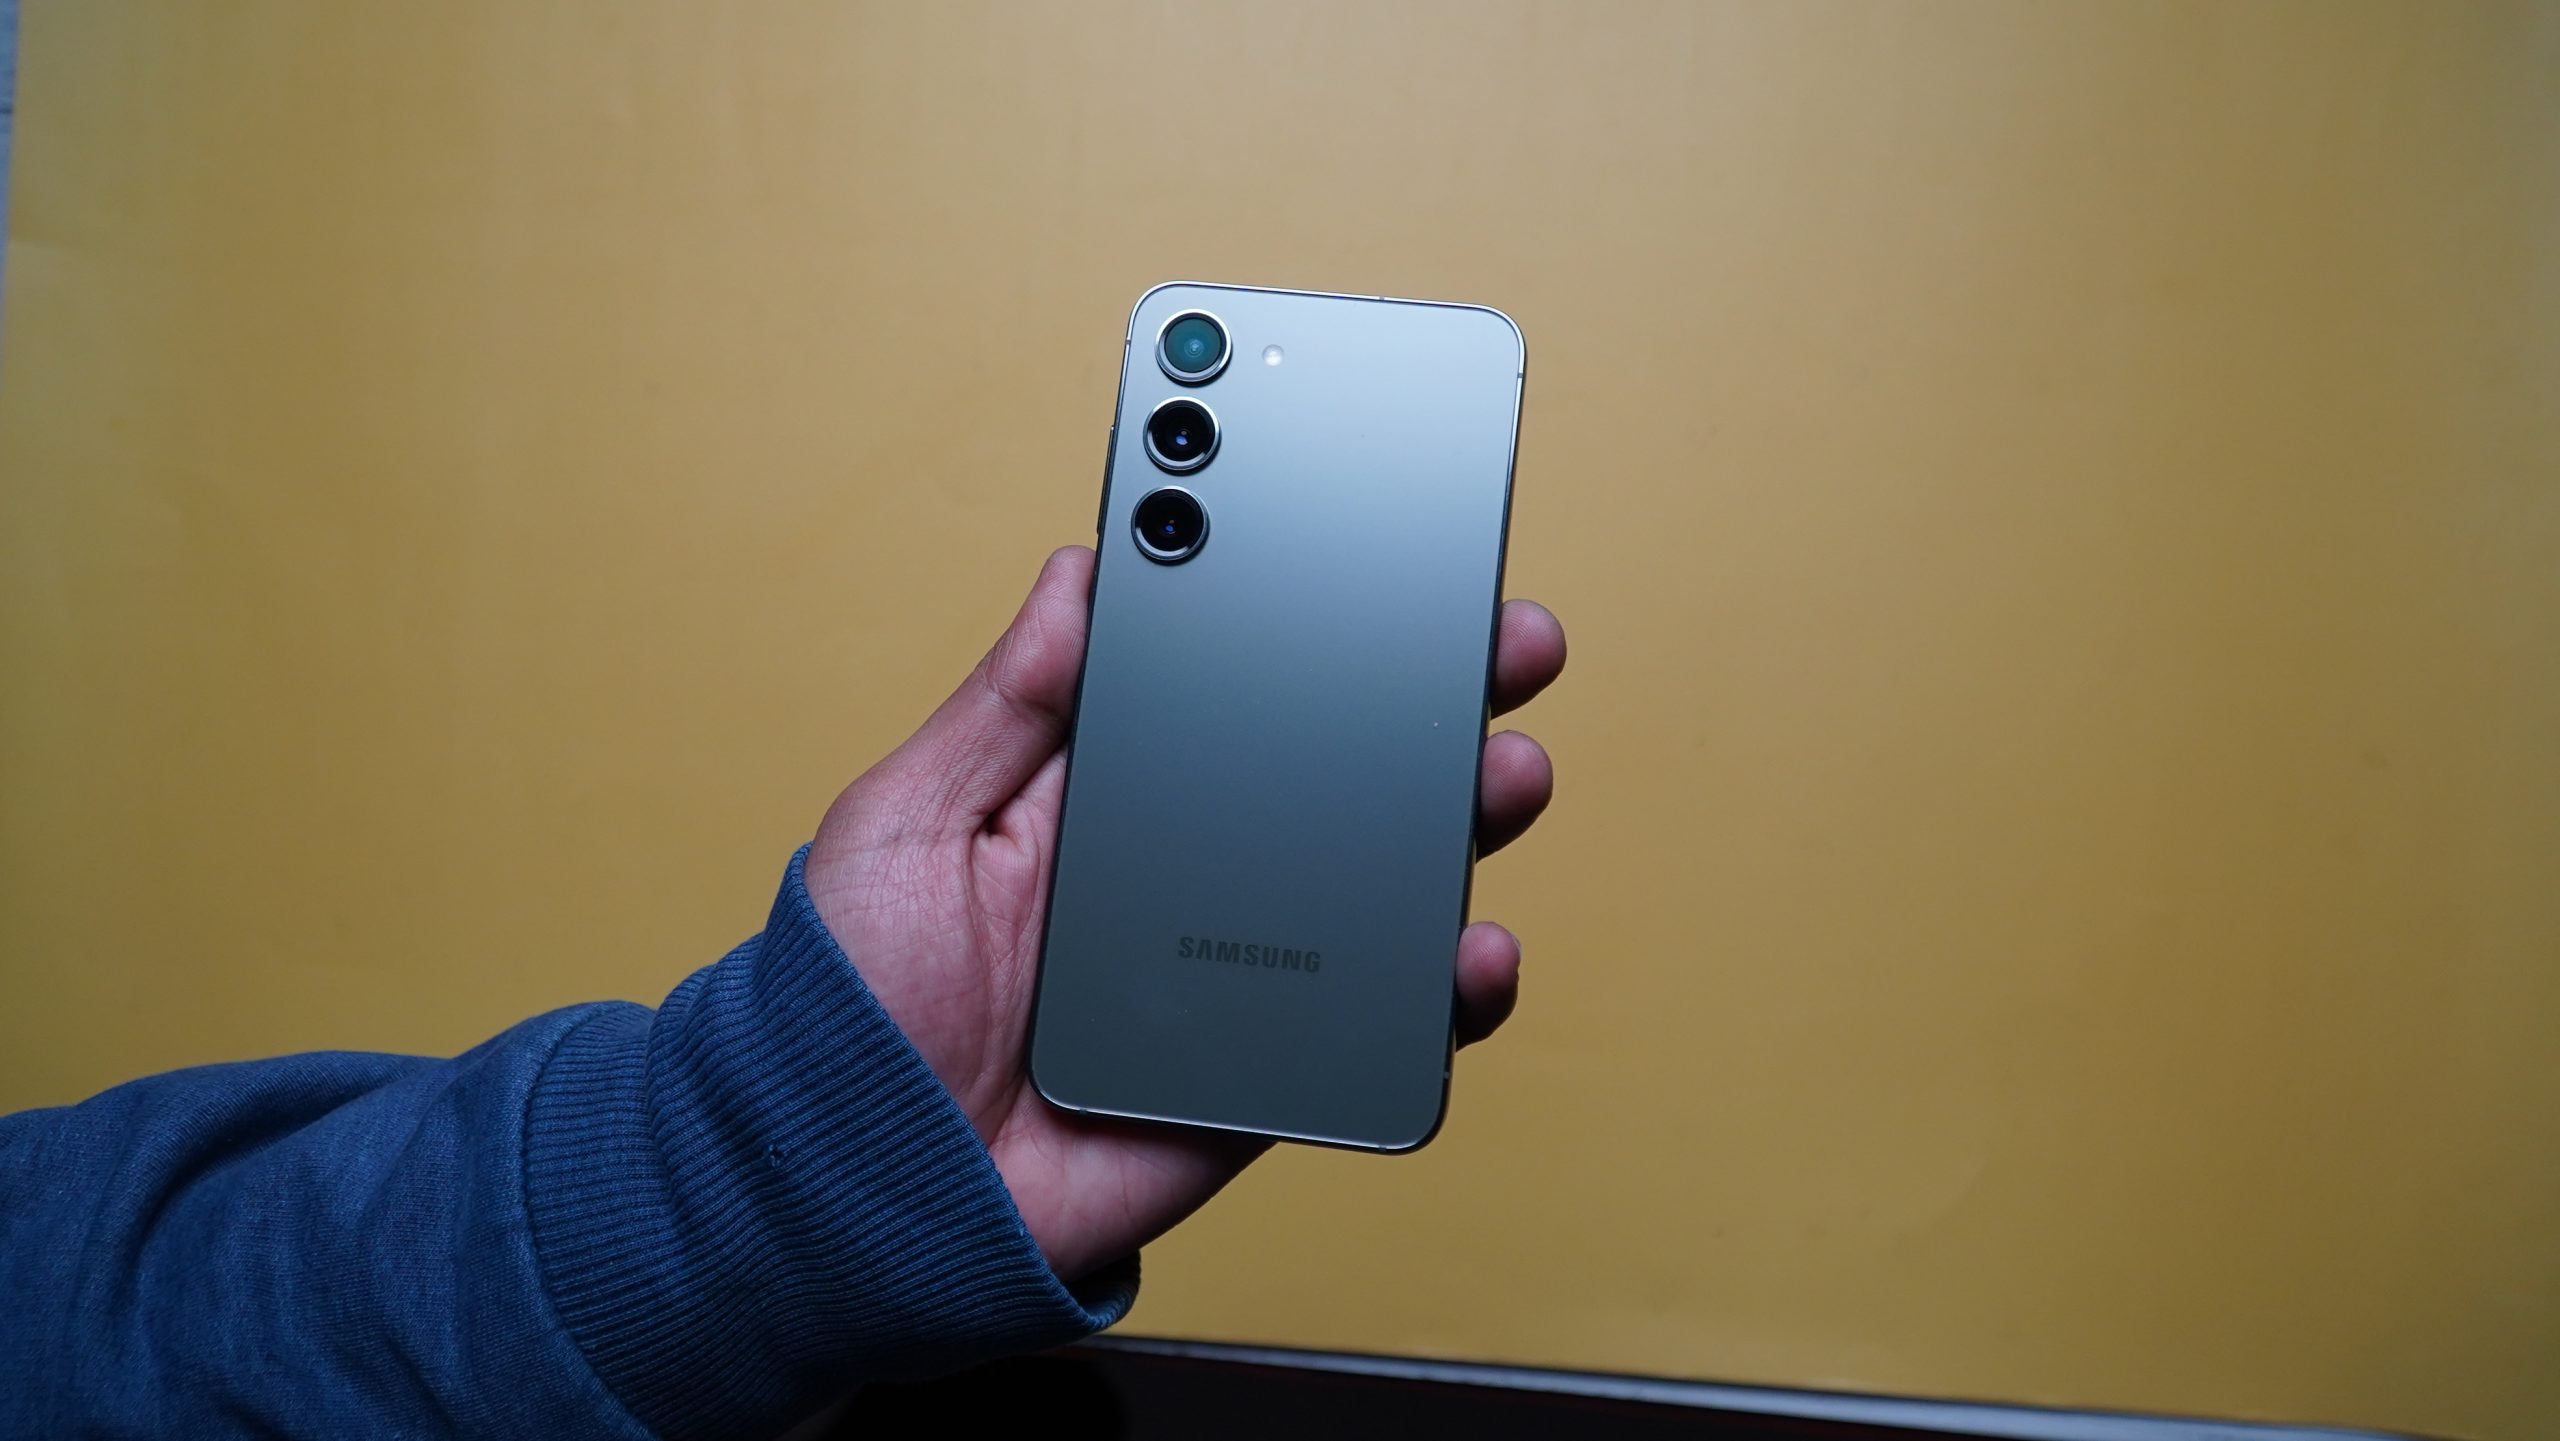 Samsung Galaxy A32 Review: Compromised Performance